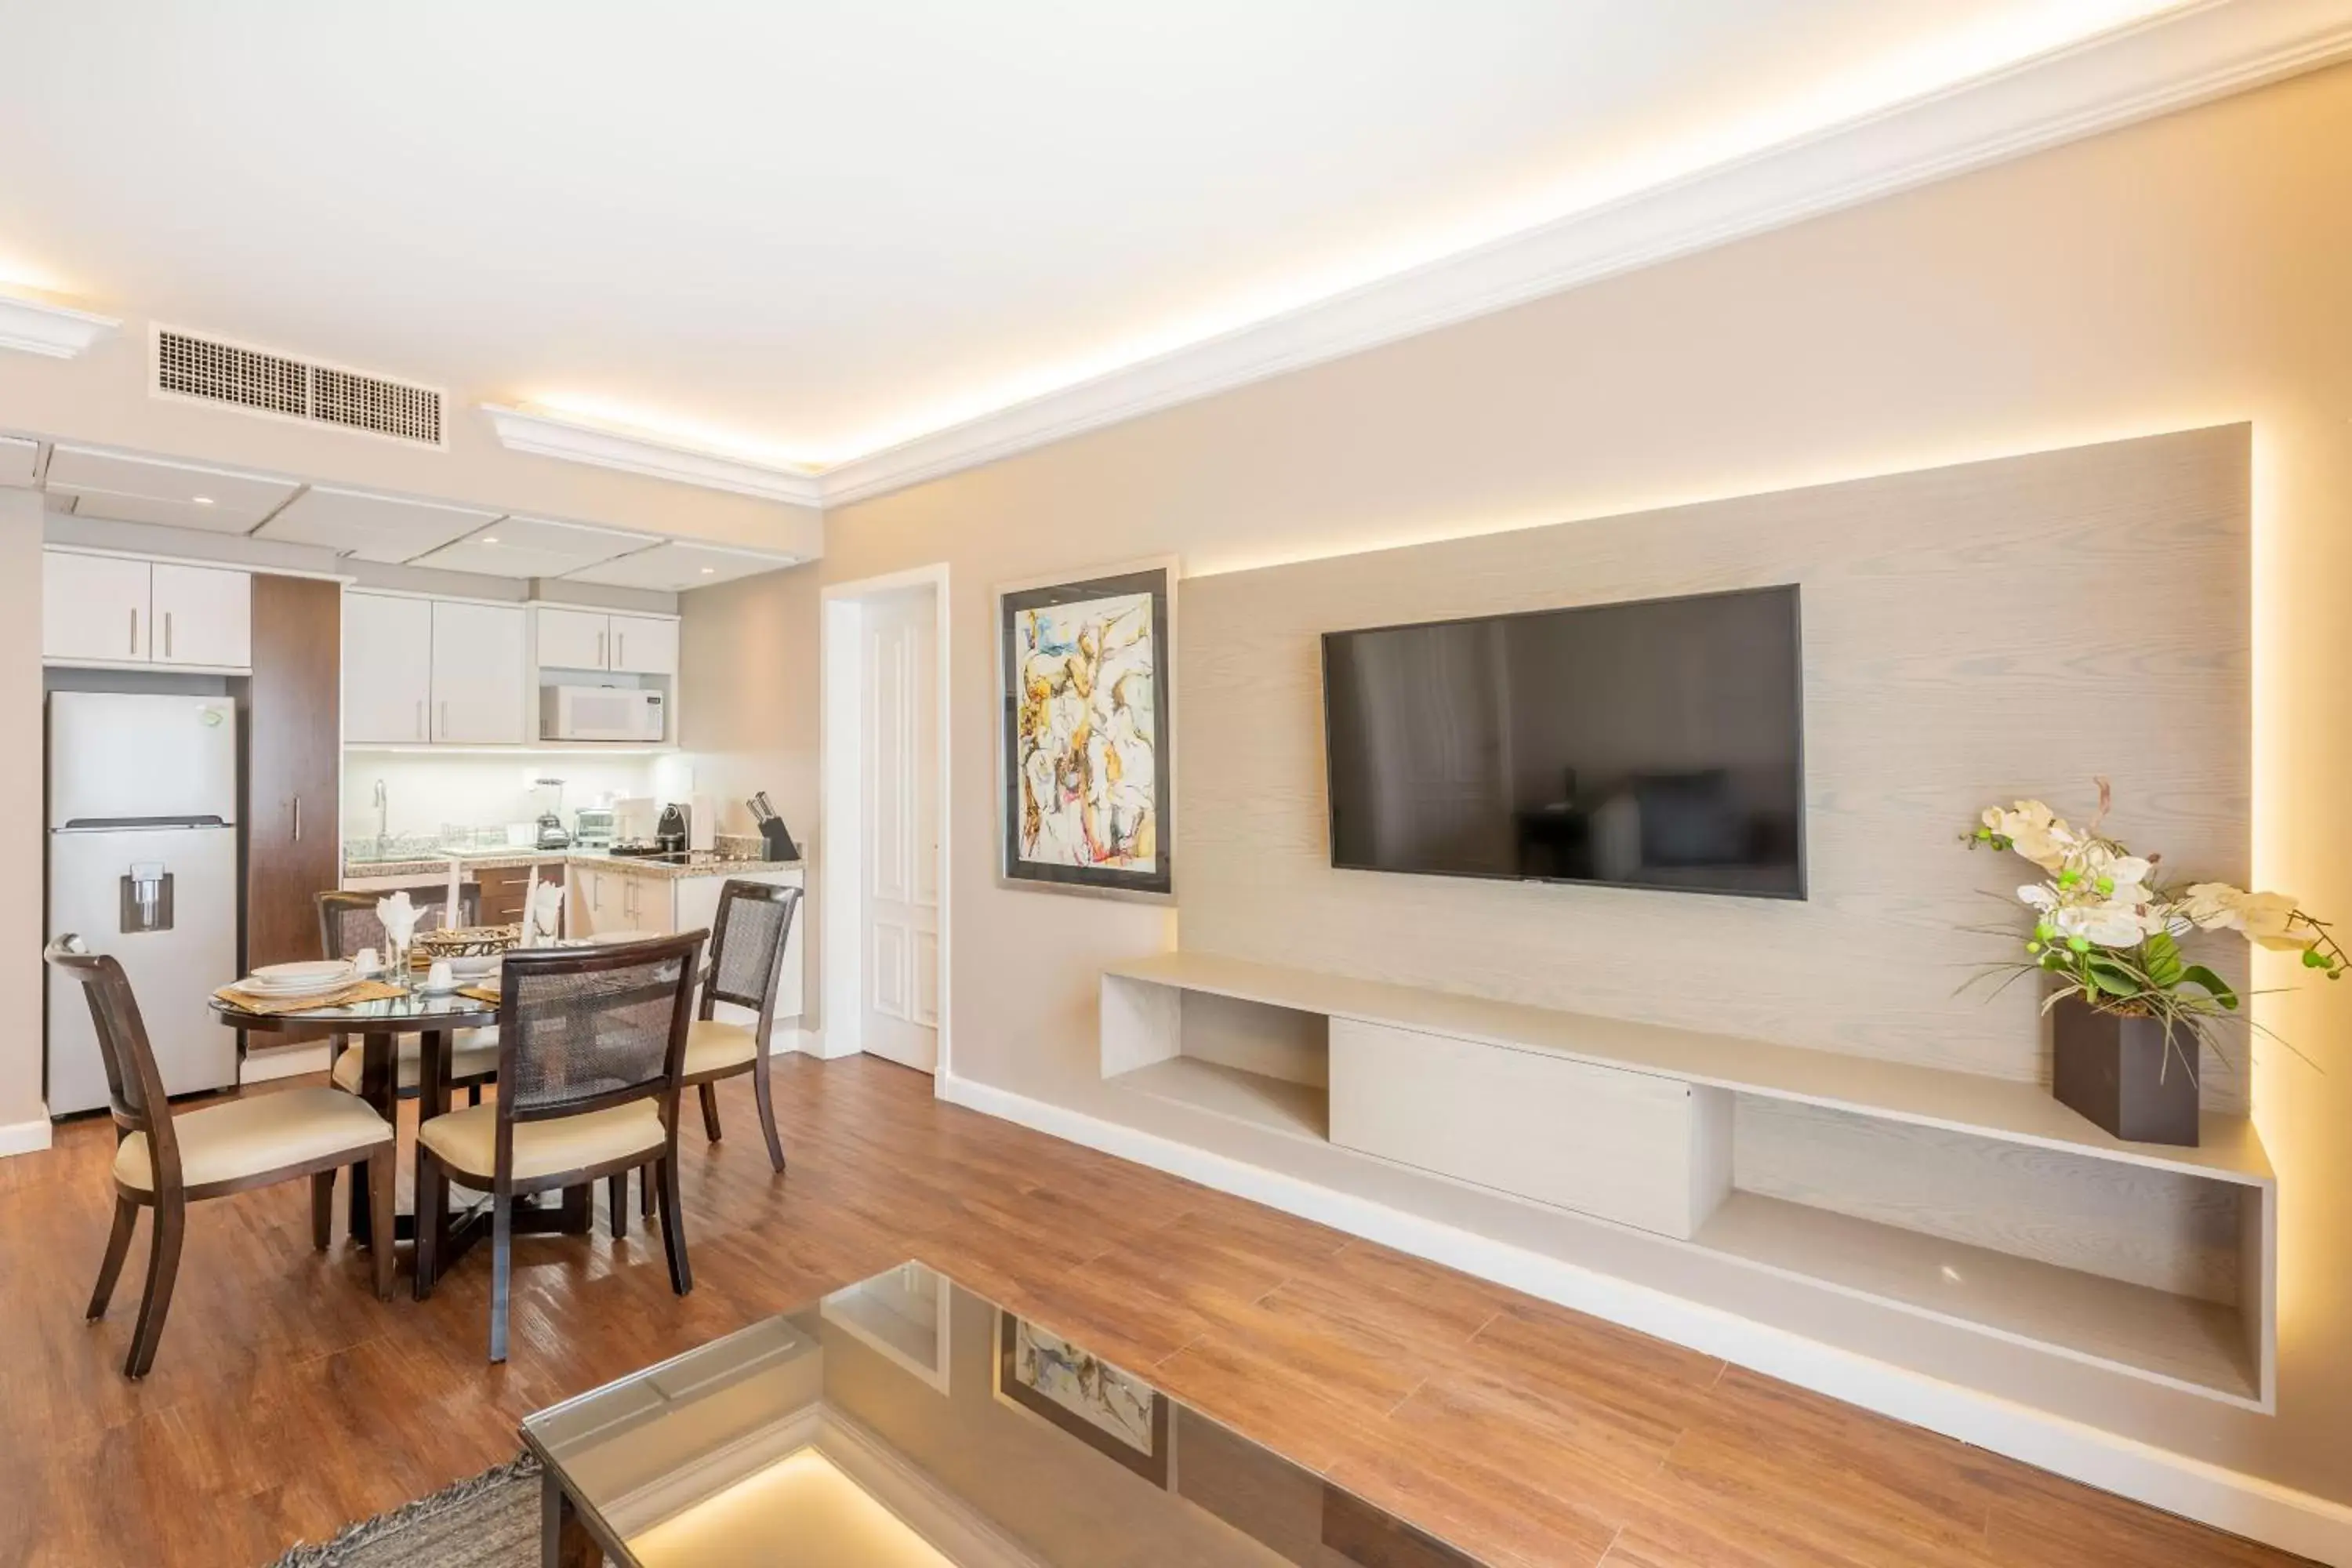 TV and multimedia, Dining Area in Grand Polanco Residencial